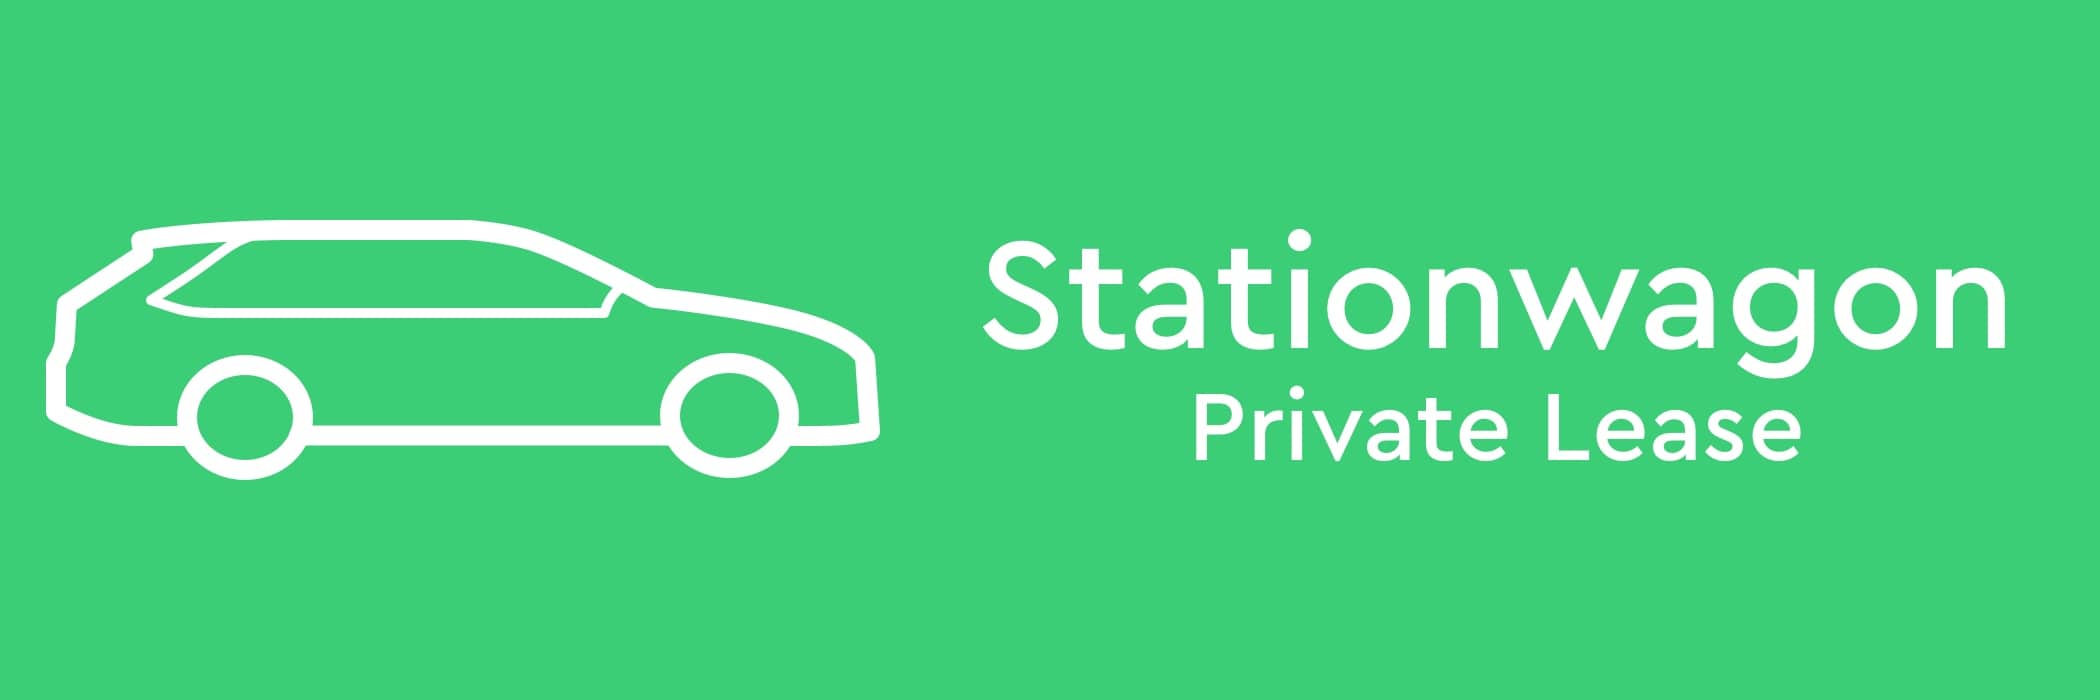 stationwagon private lease station